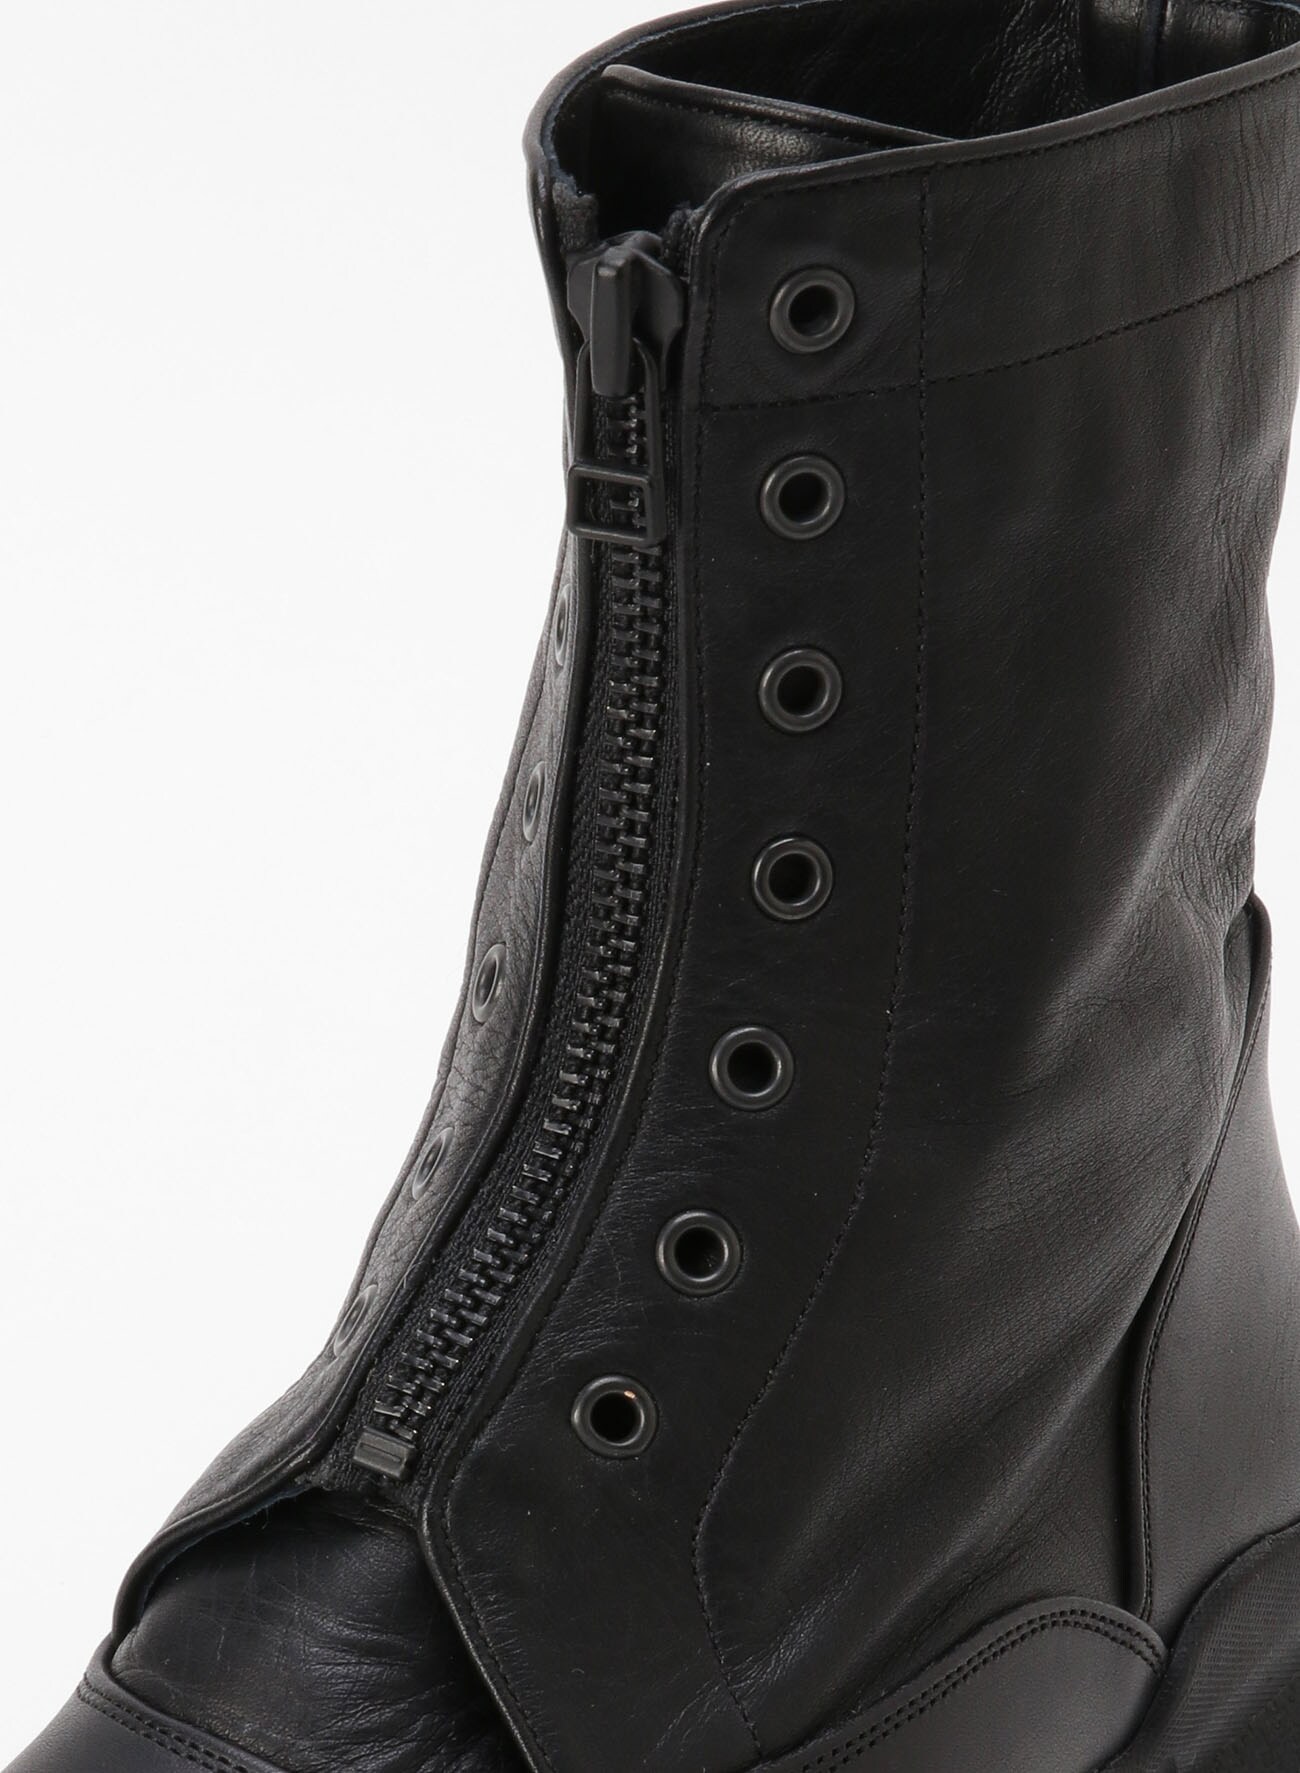 NUME SOFT LEATHER COMBI FRONT ZIPPER BOOTS